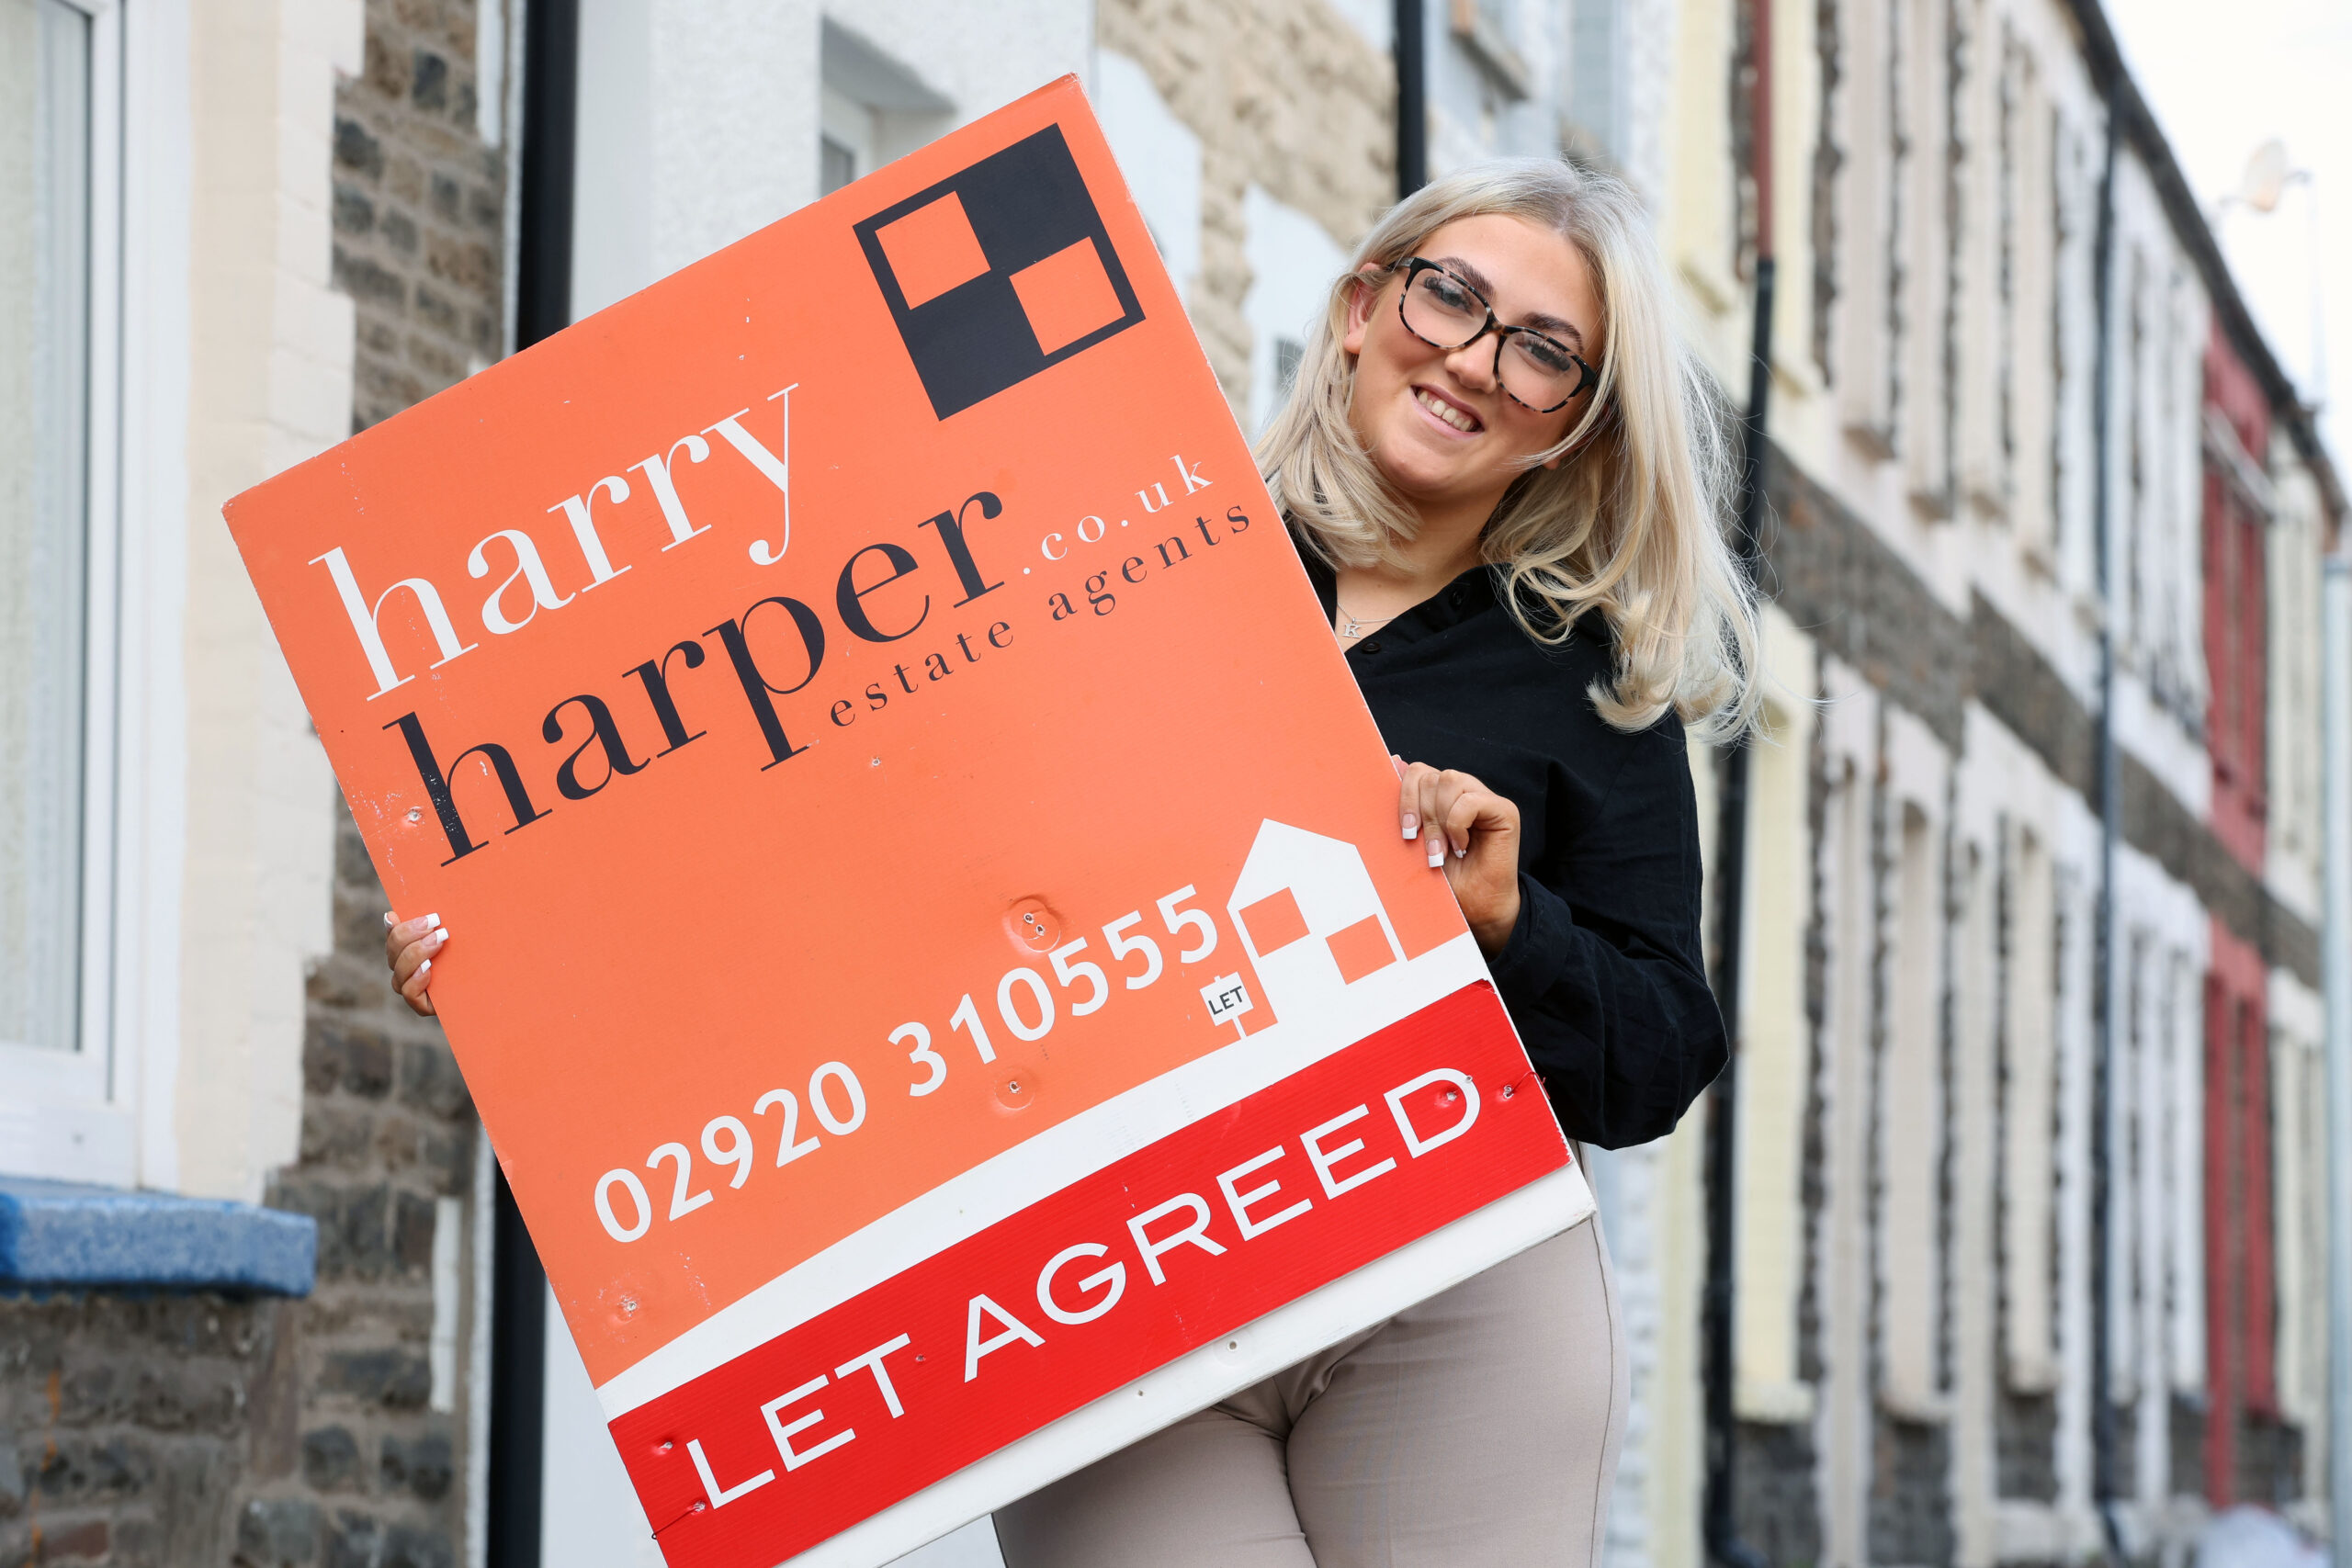 Katie Pearce, 18, Trainee Negotiator at Harry Harper Sales and Lettings